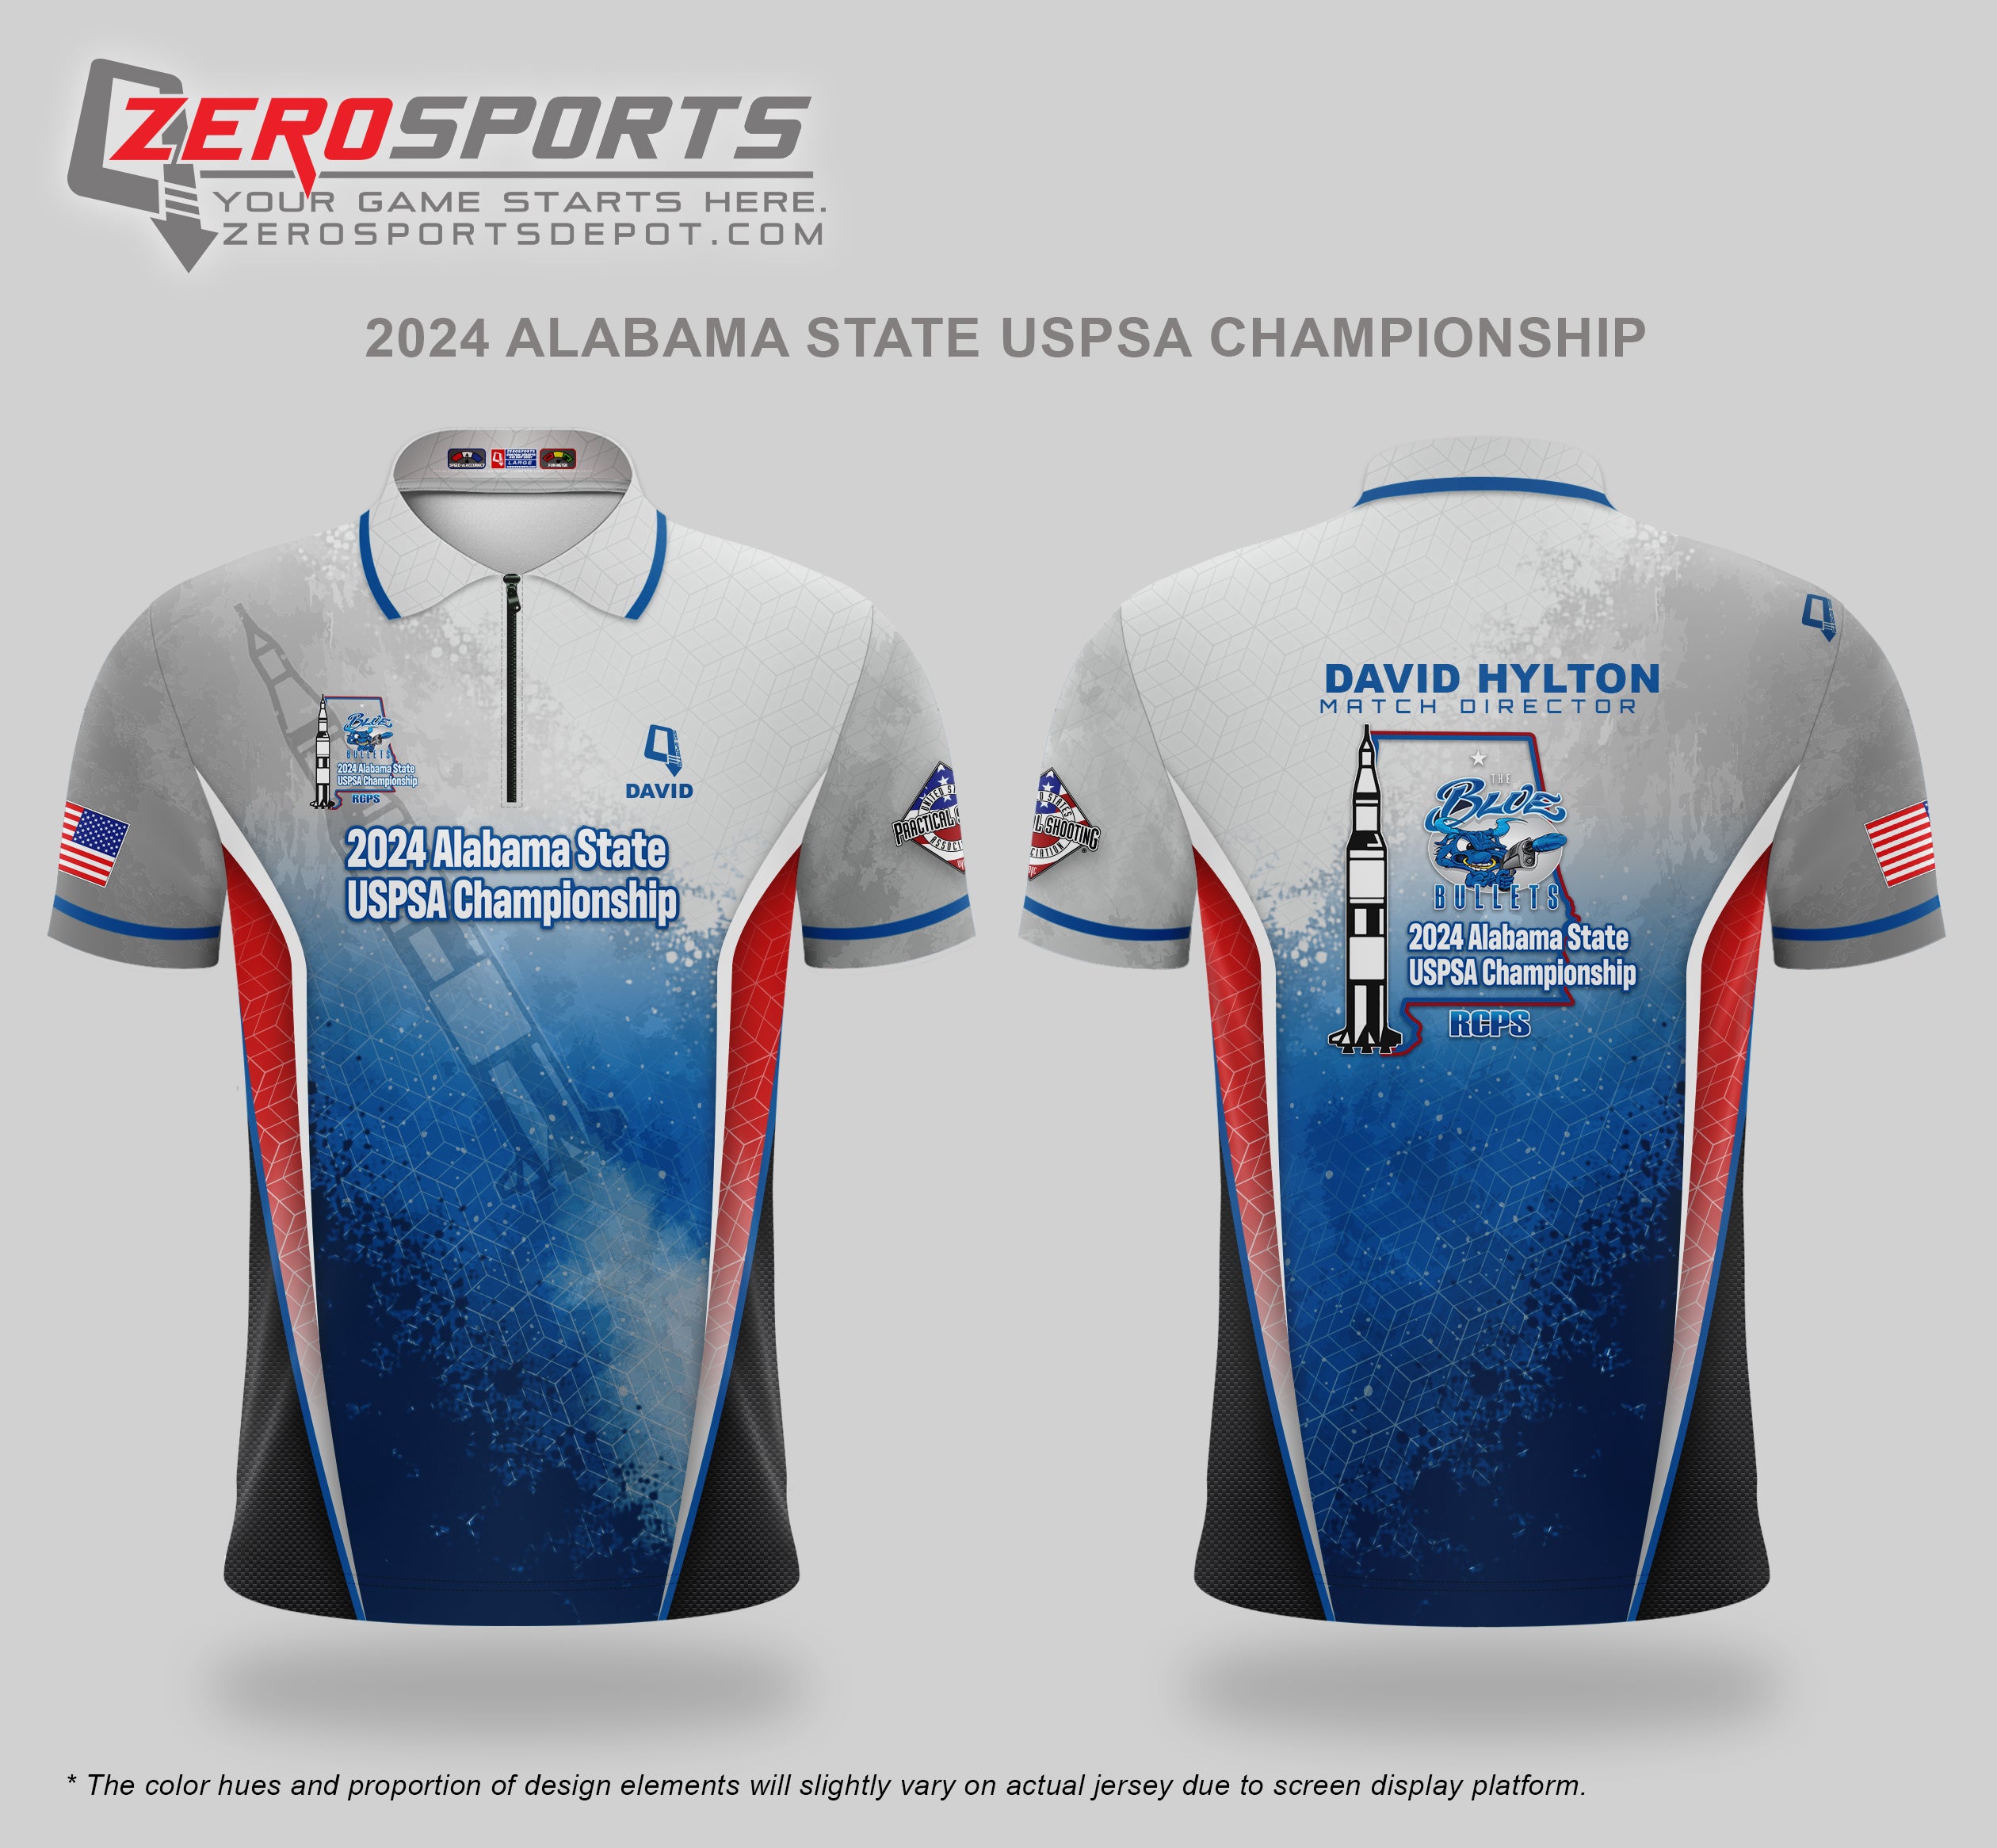 2024 Alabama State USPSA Championship Match Jersey  **All orders after 4/12/2024 will be shipped directly to your address after the match.